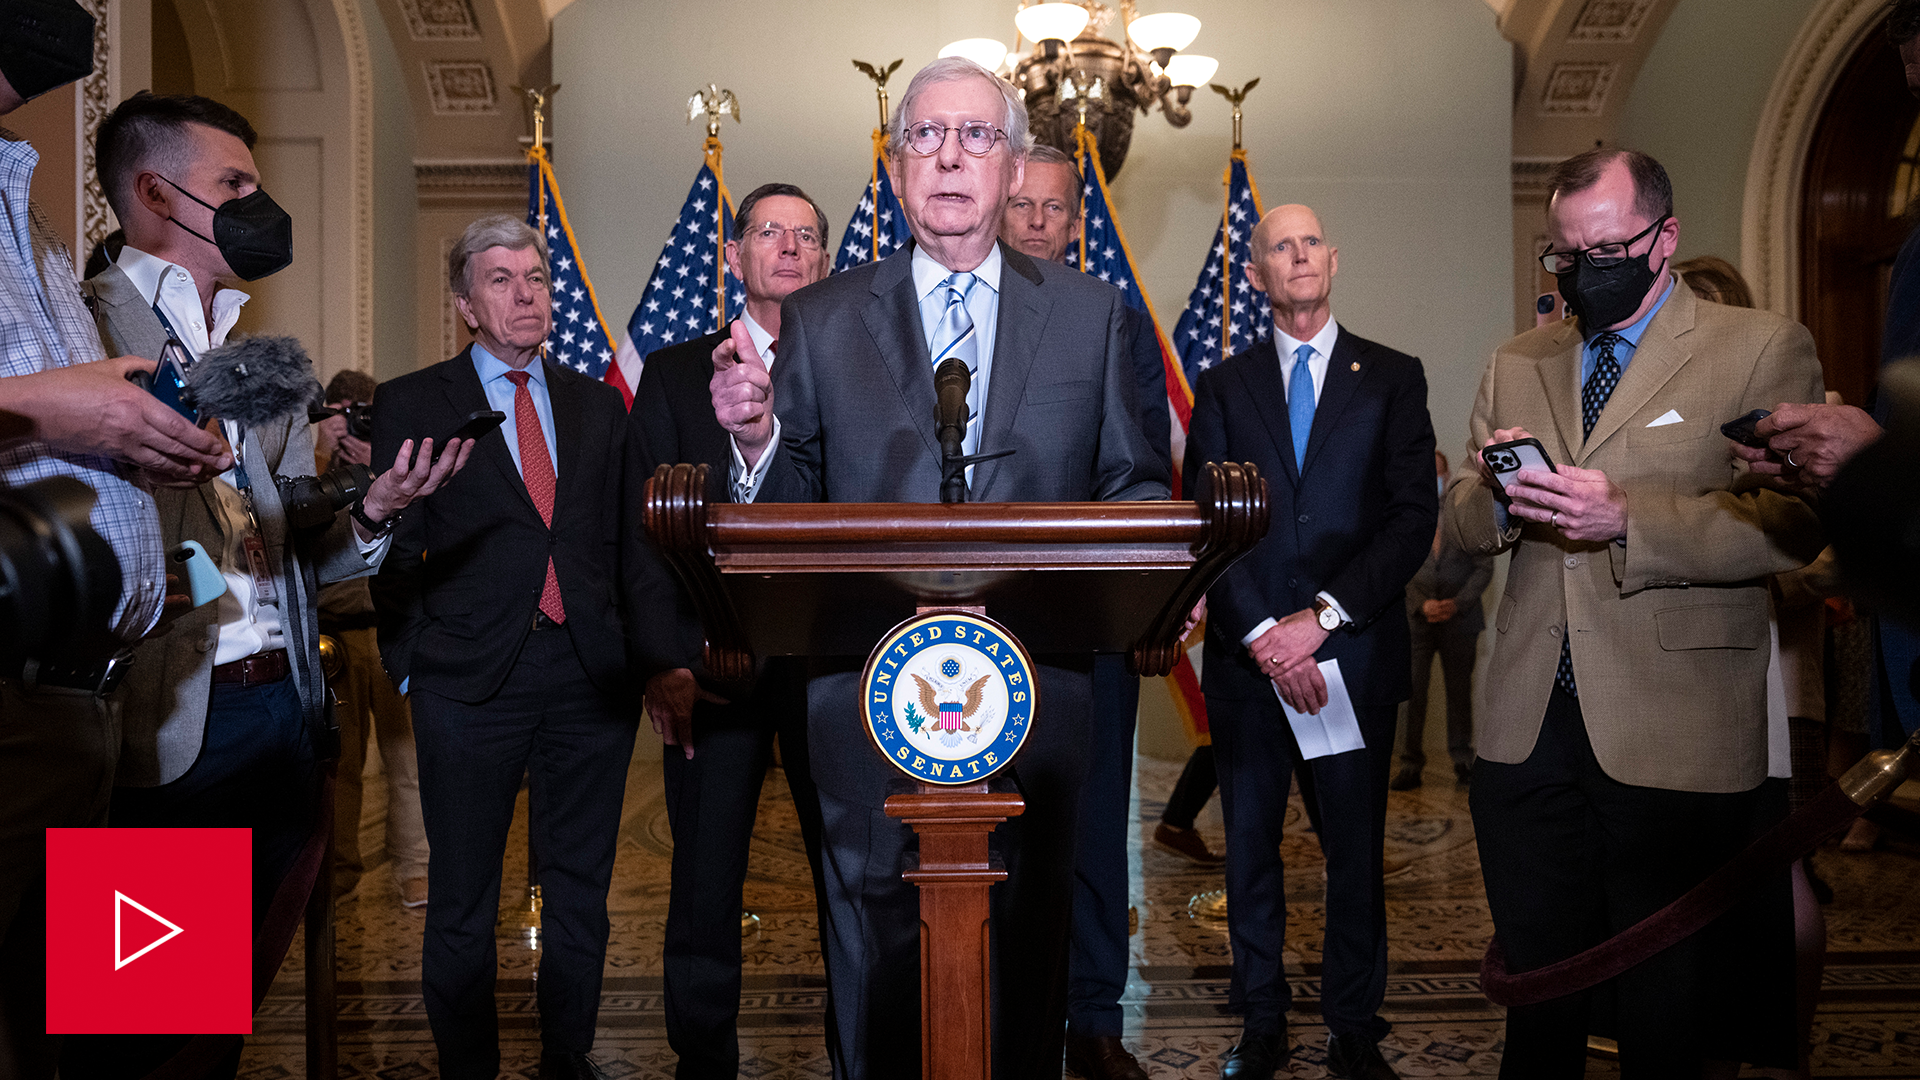 Senate Minority Leader Mitch McConnell speaks to reporters.